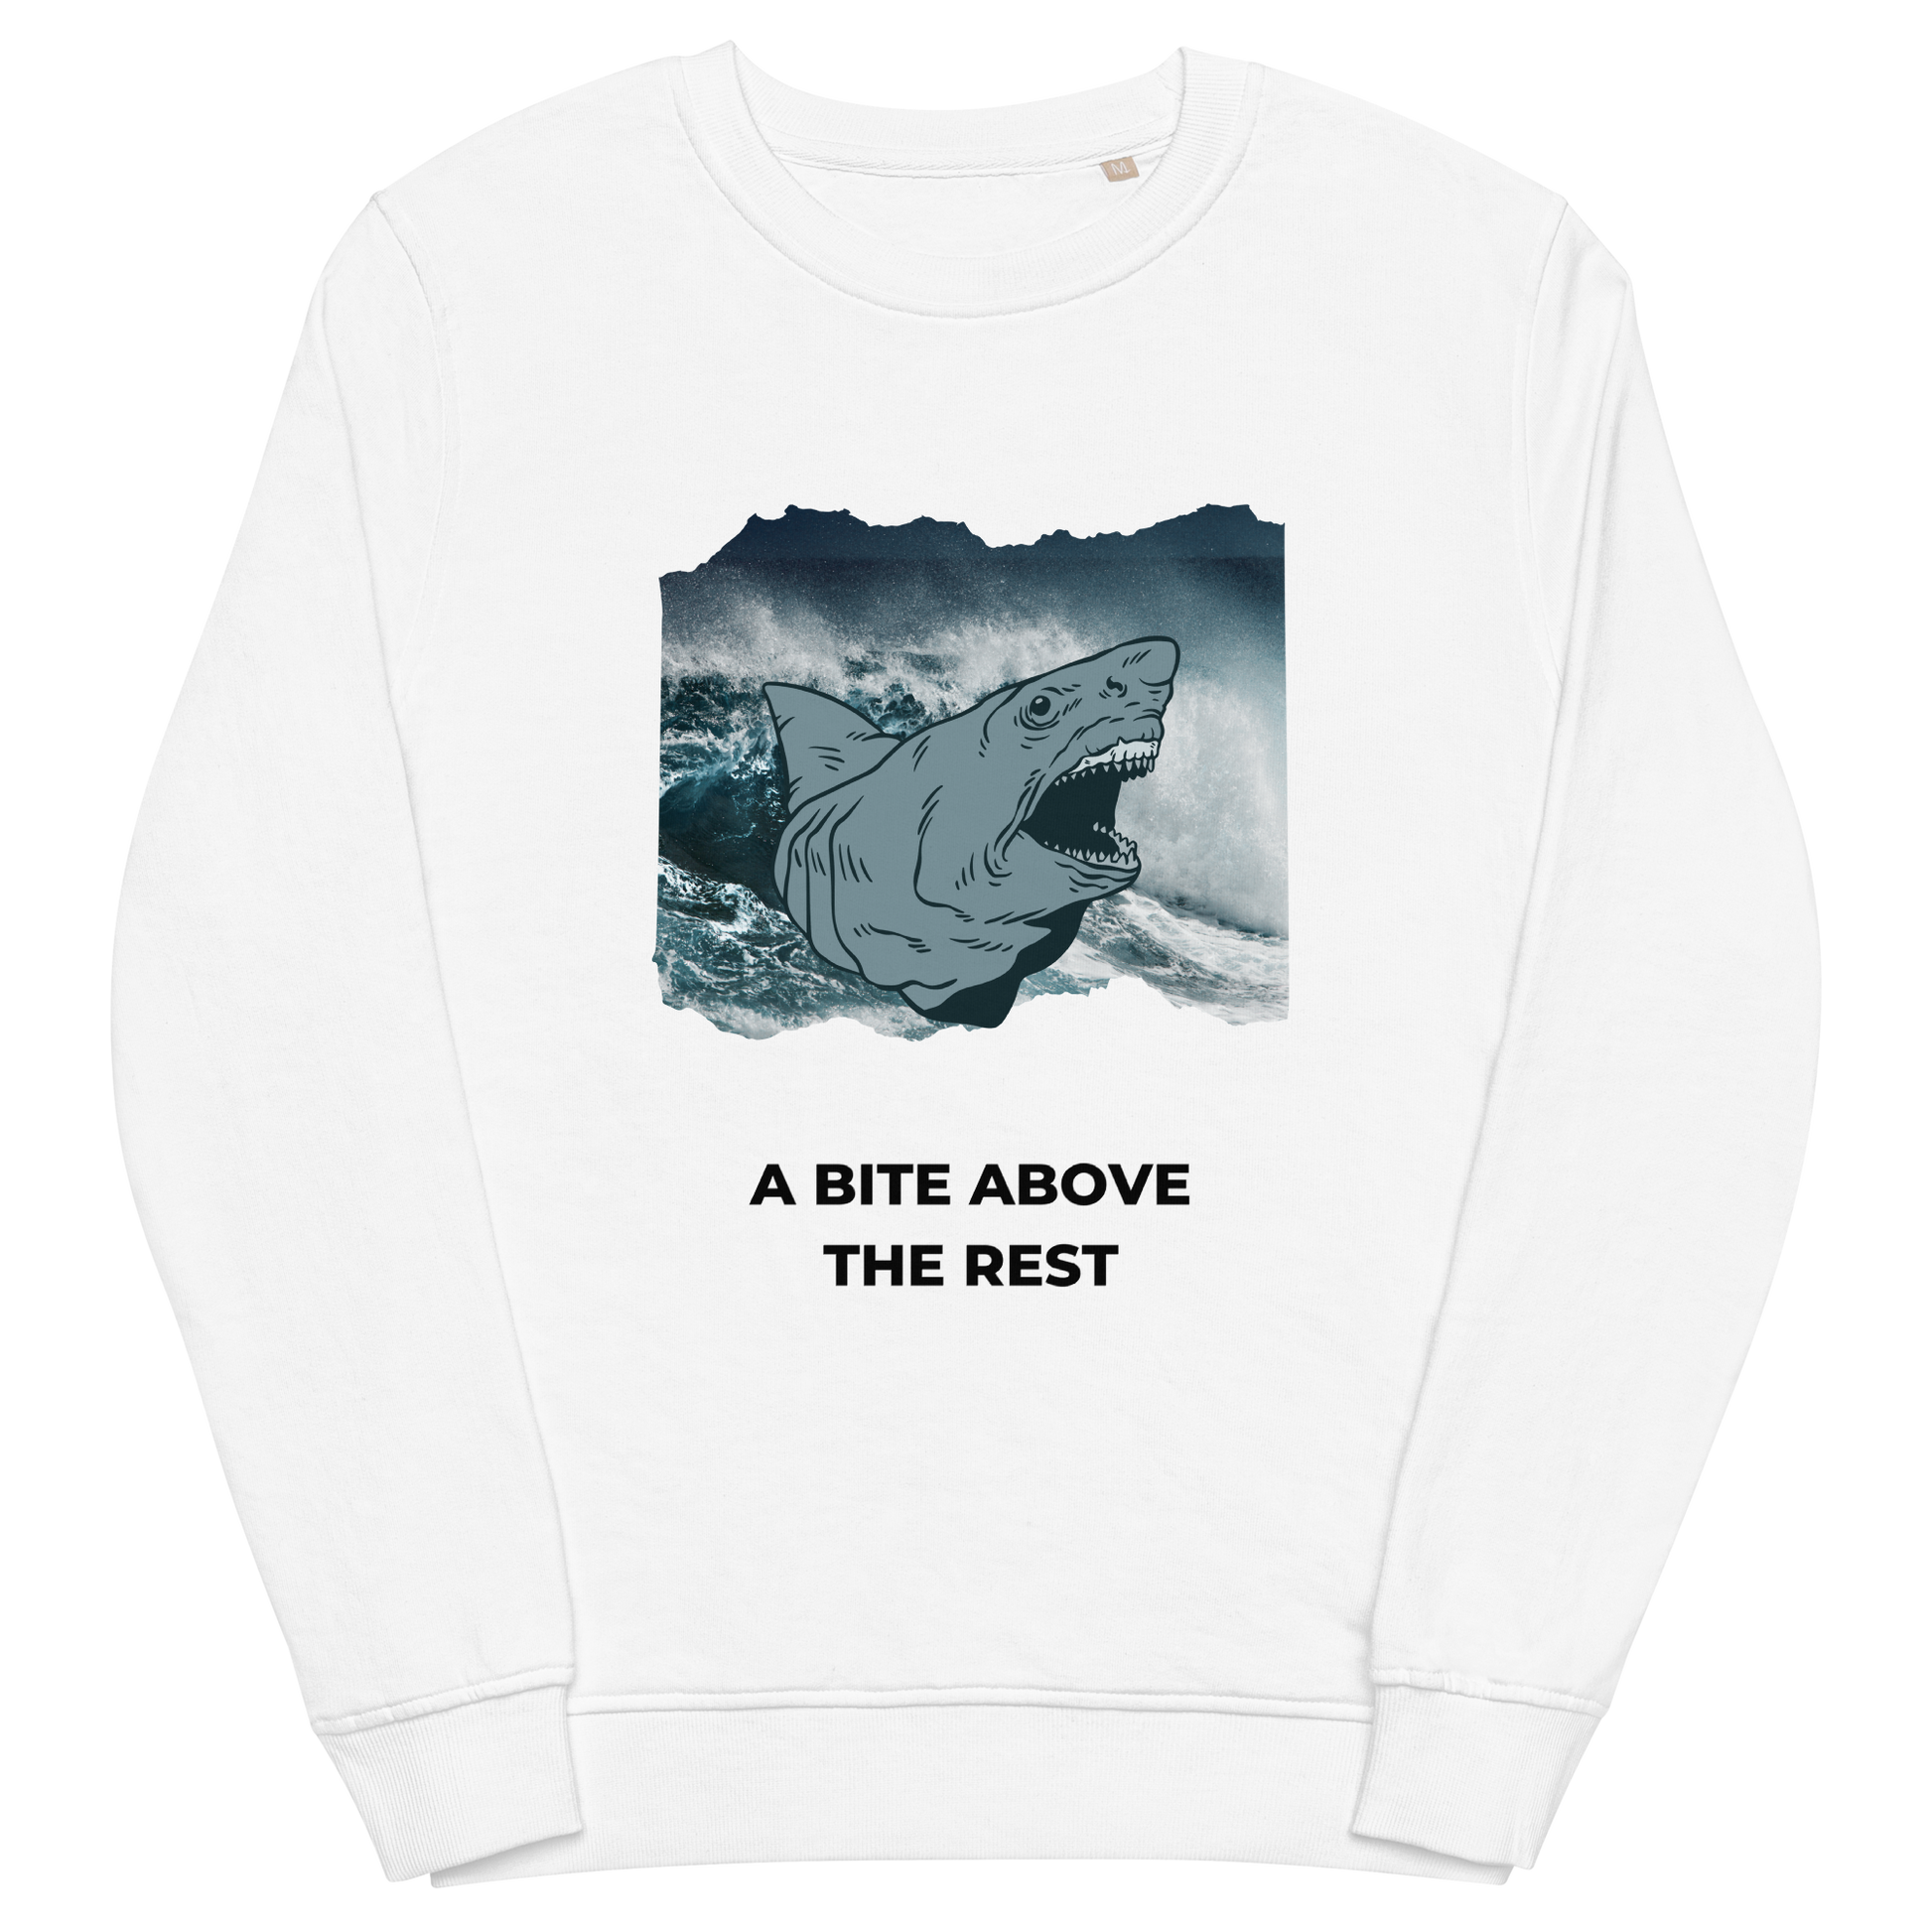 White Organic Cotton Megalodon Sweatshirt featuring the jaw-dropping 'A Bite Above the Rest' graphic on the chest - Funny Graphic Megalodon Sweatshirts - Boozy Fox